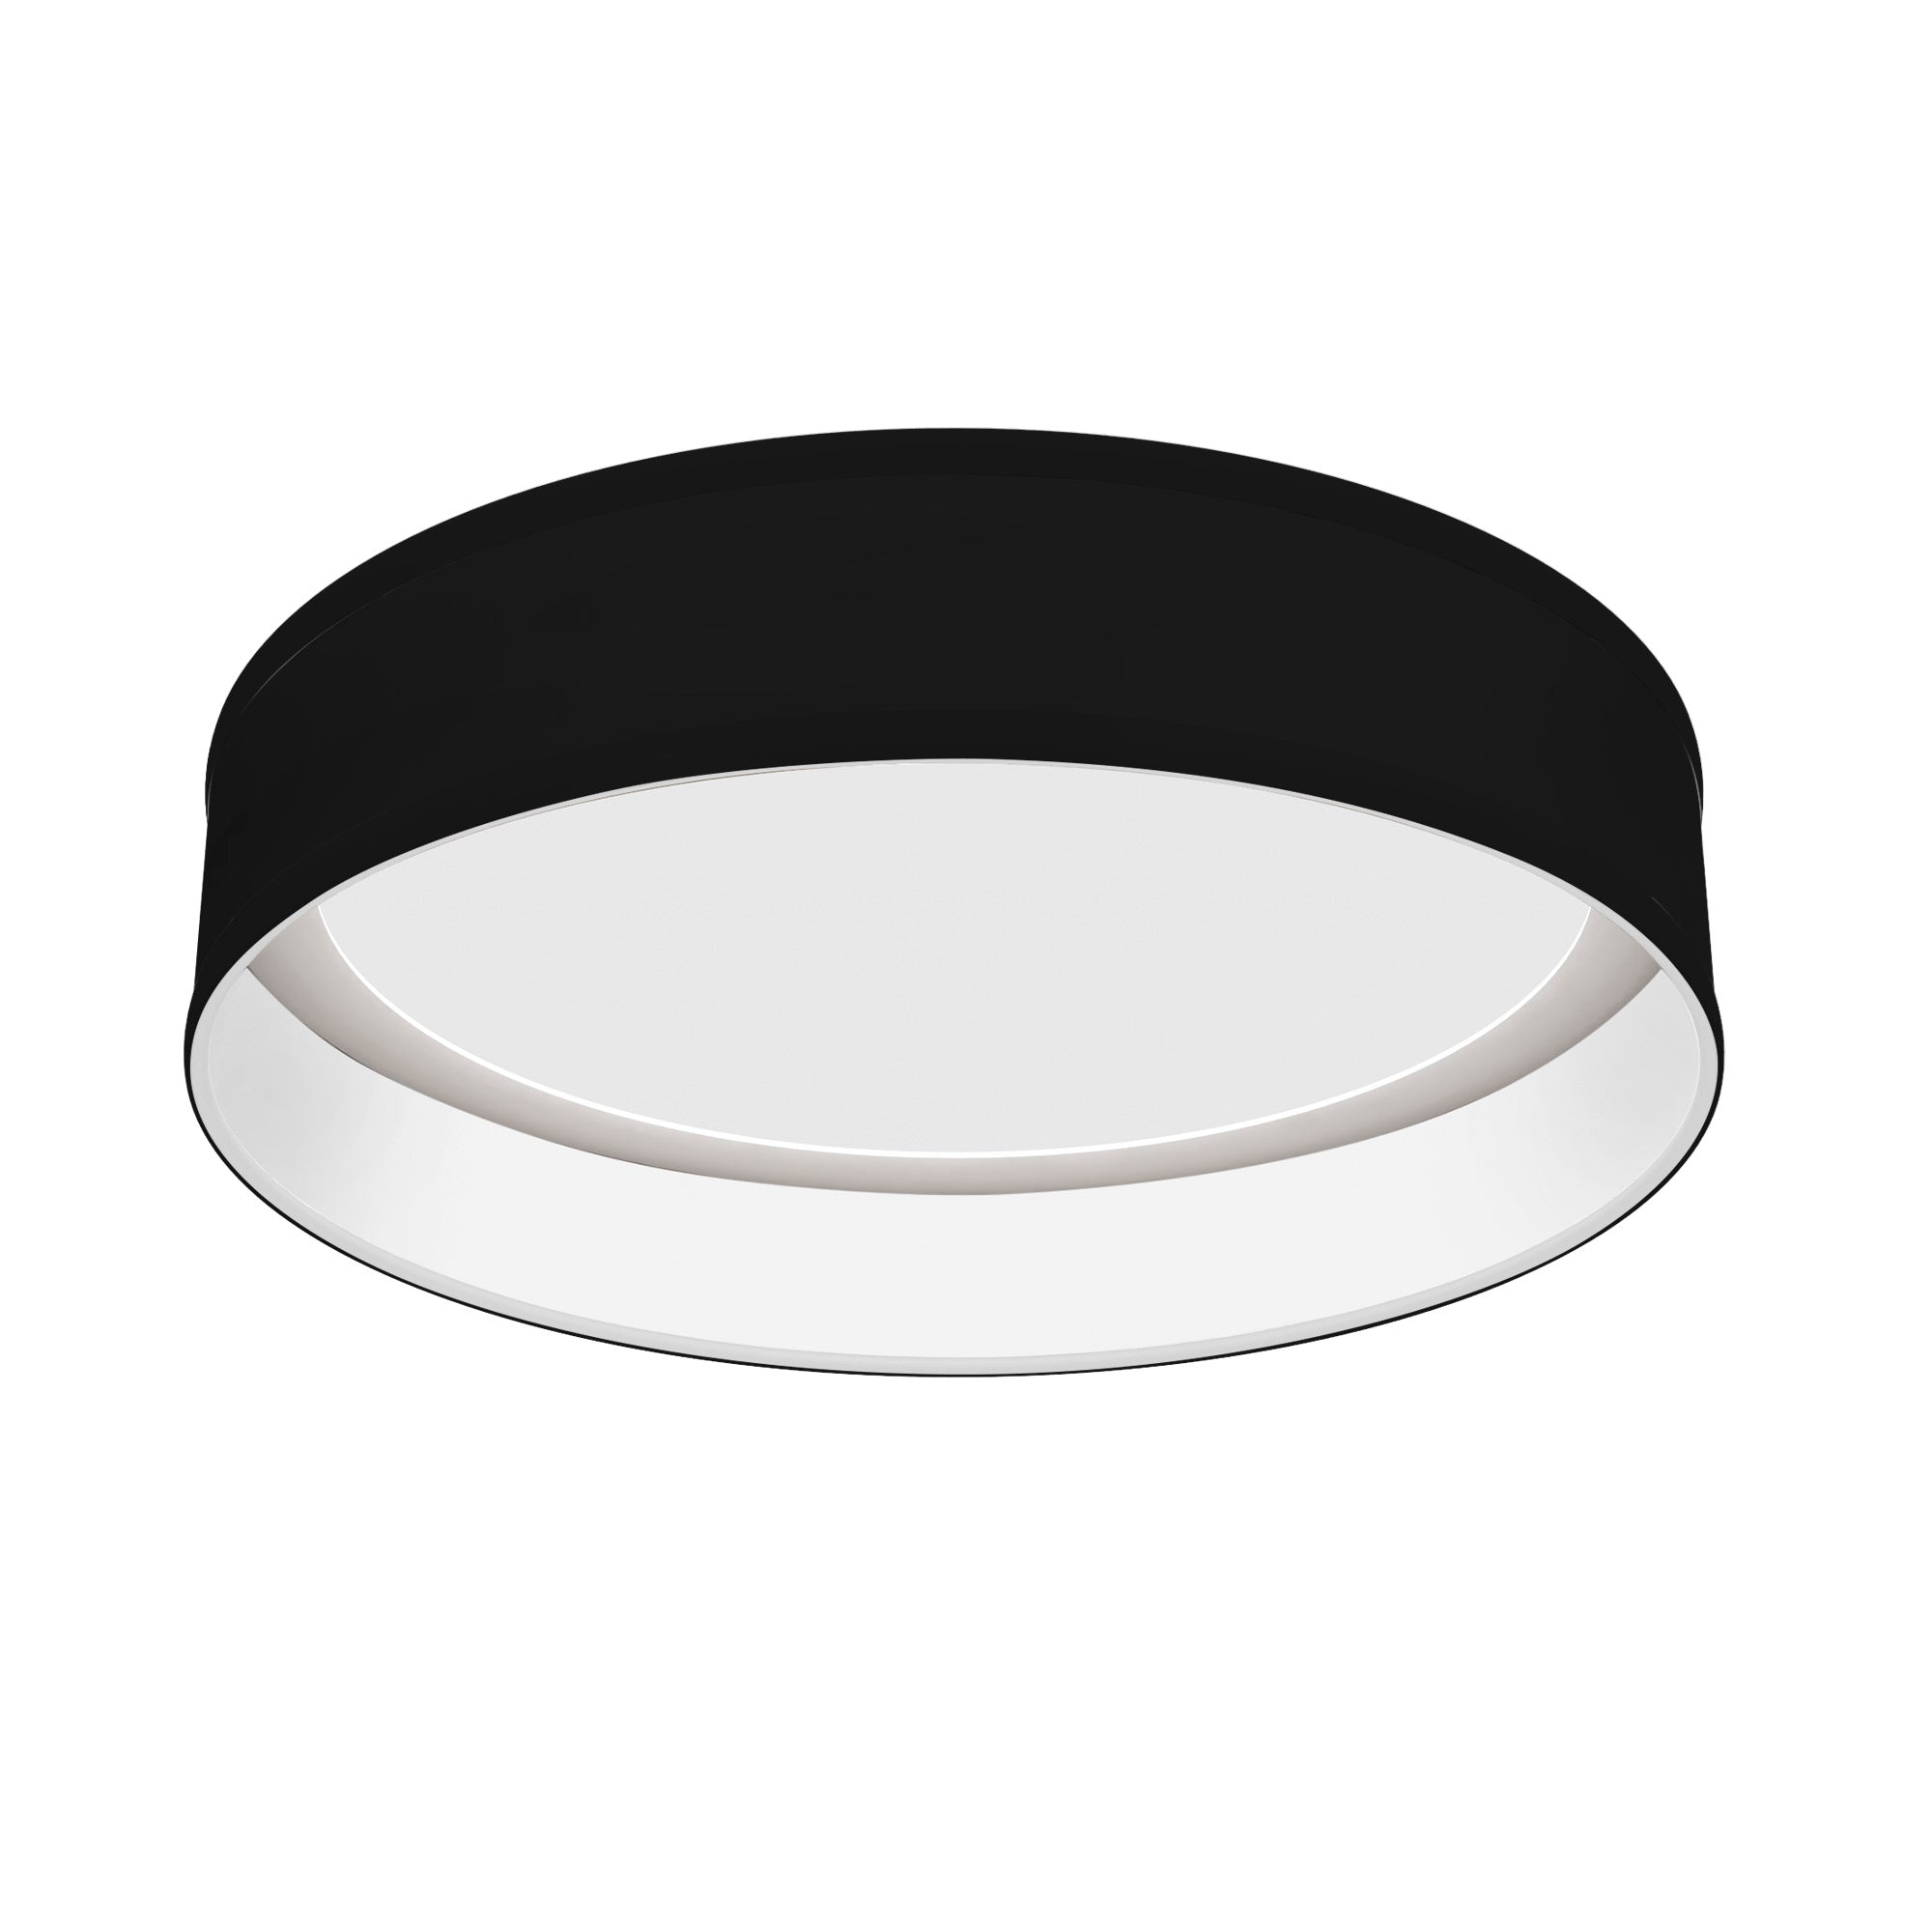 The Vince Flush Mount from Seascape Fixtures with a linen shade in black color.